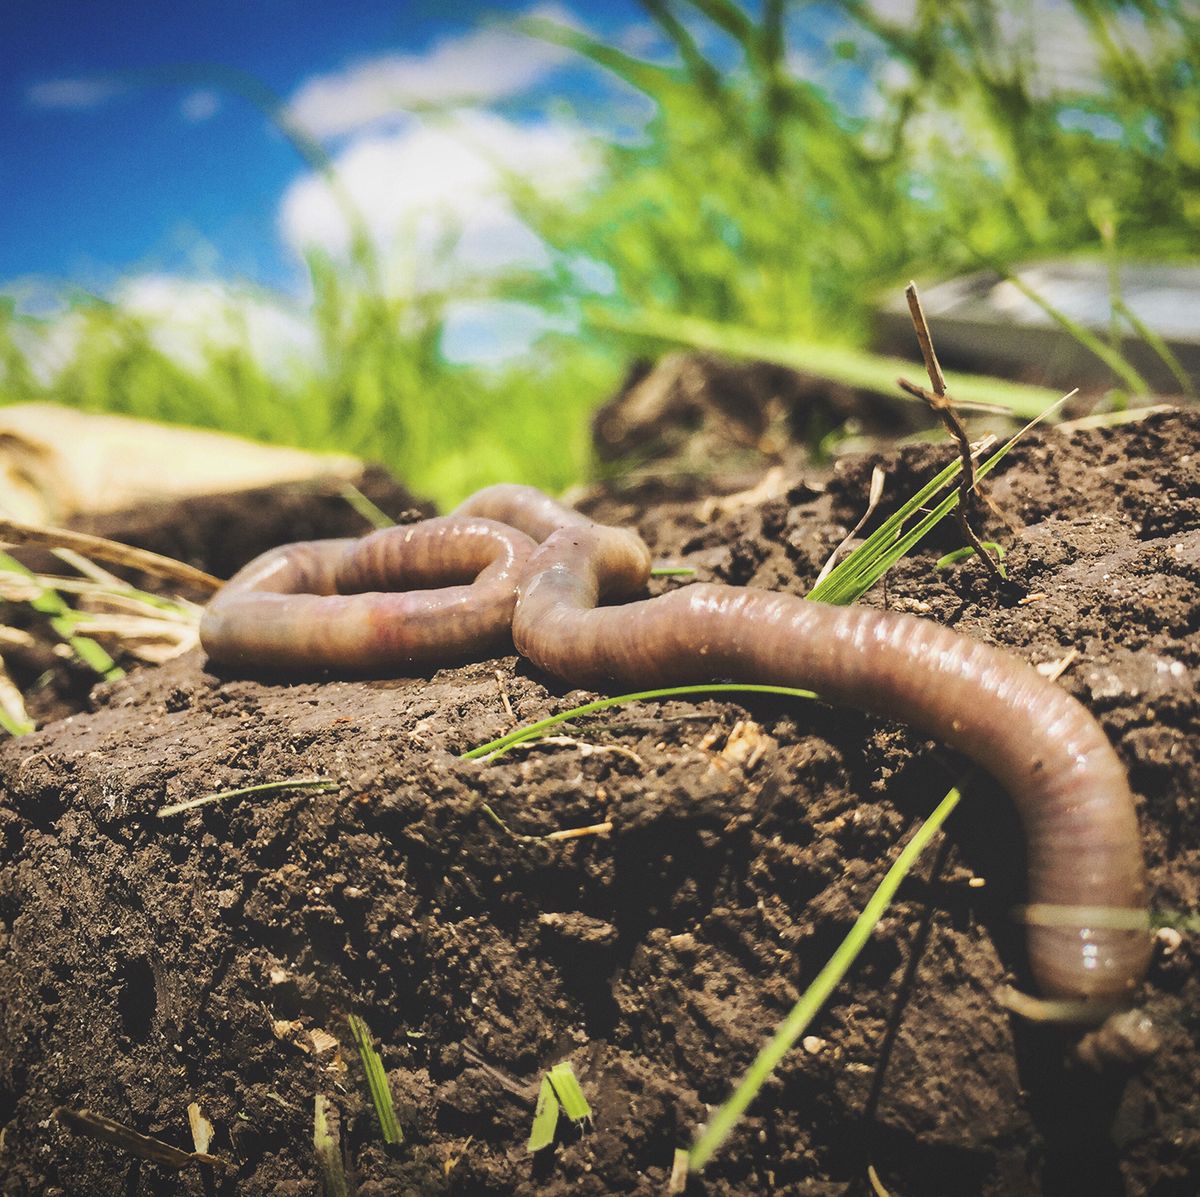 11 facts about earthworms that will blow your mind